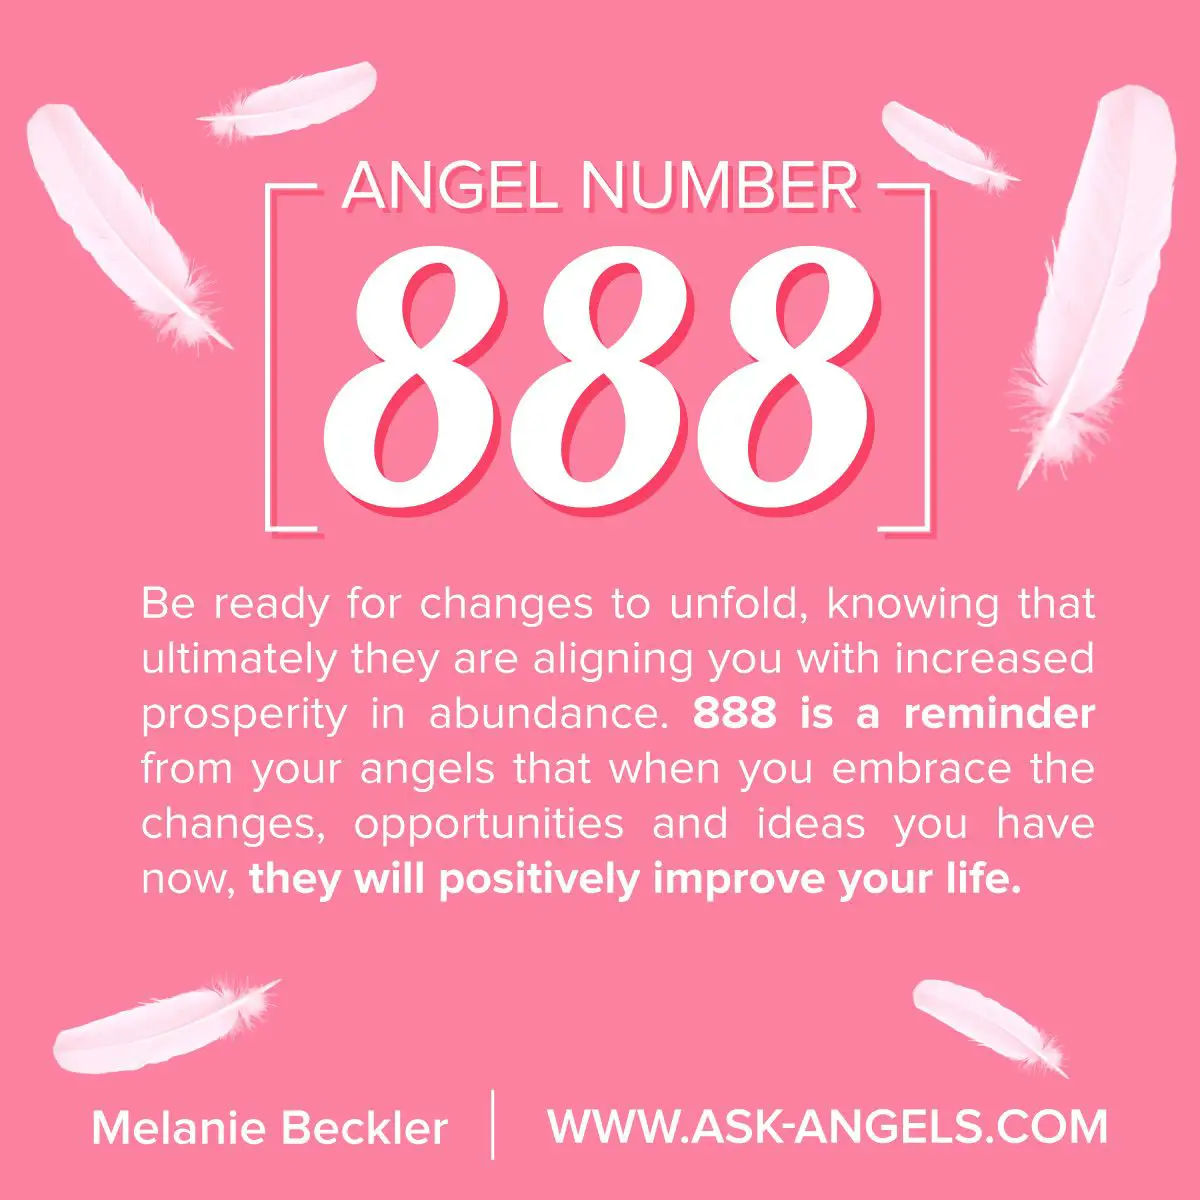 What Is 888?